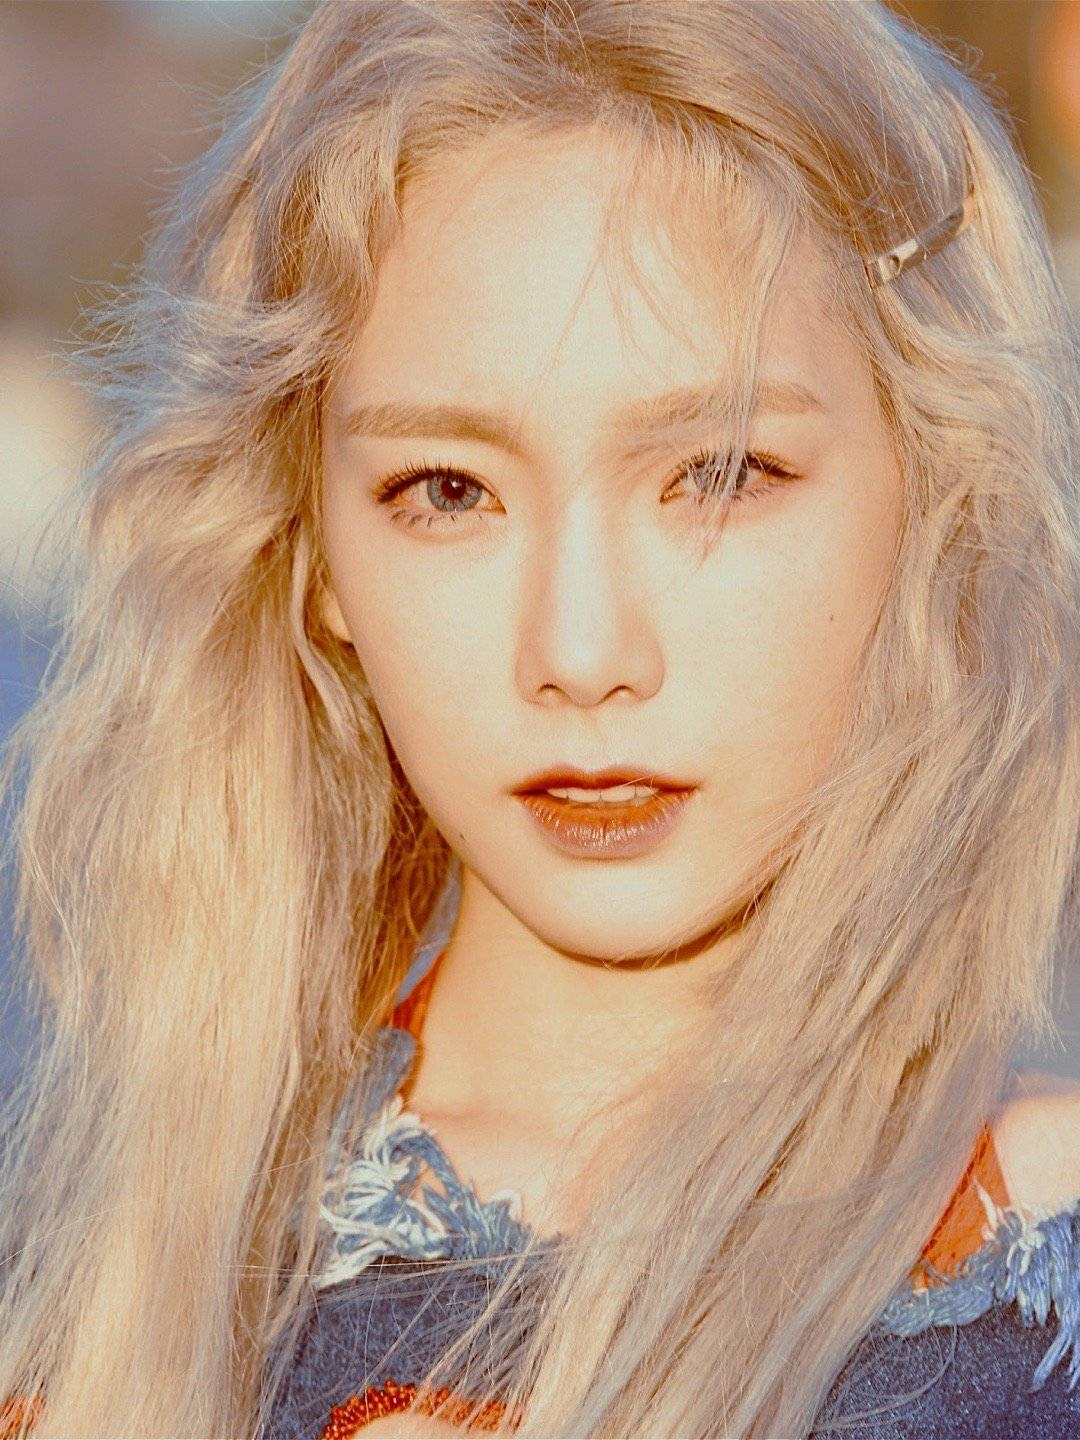 TAEYEON 2nd mini album 'Why' Teaser - Official PHOTO | GGPM